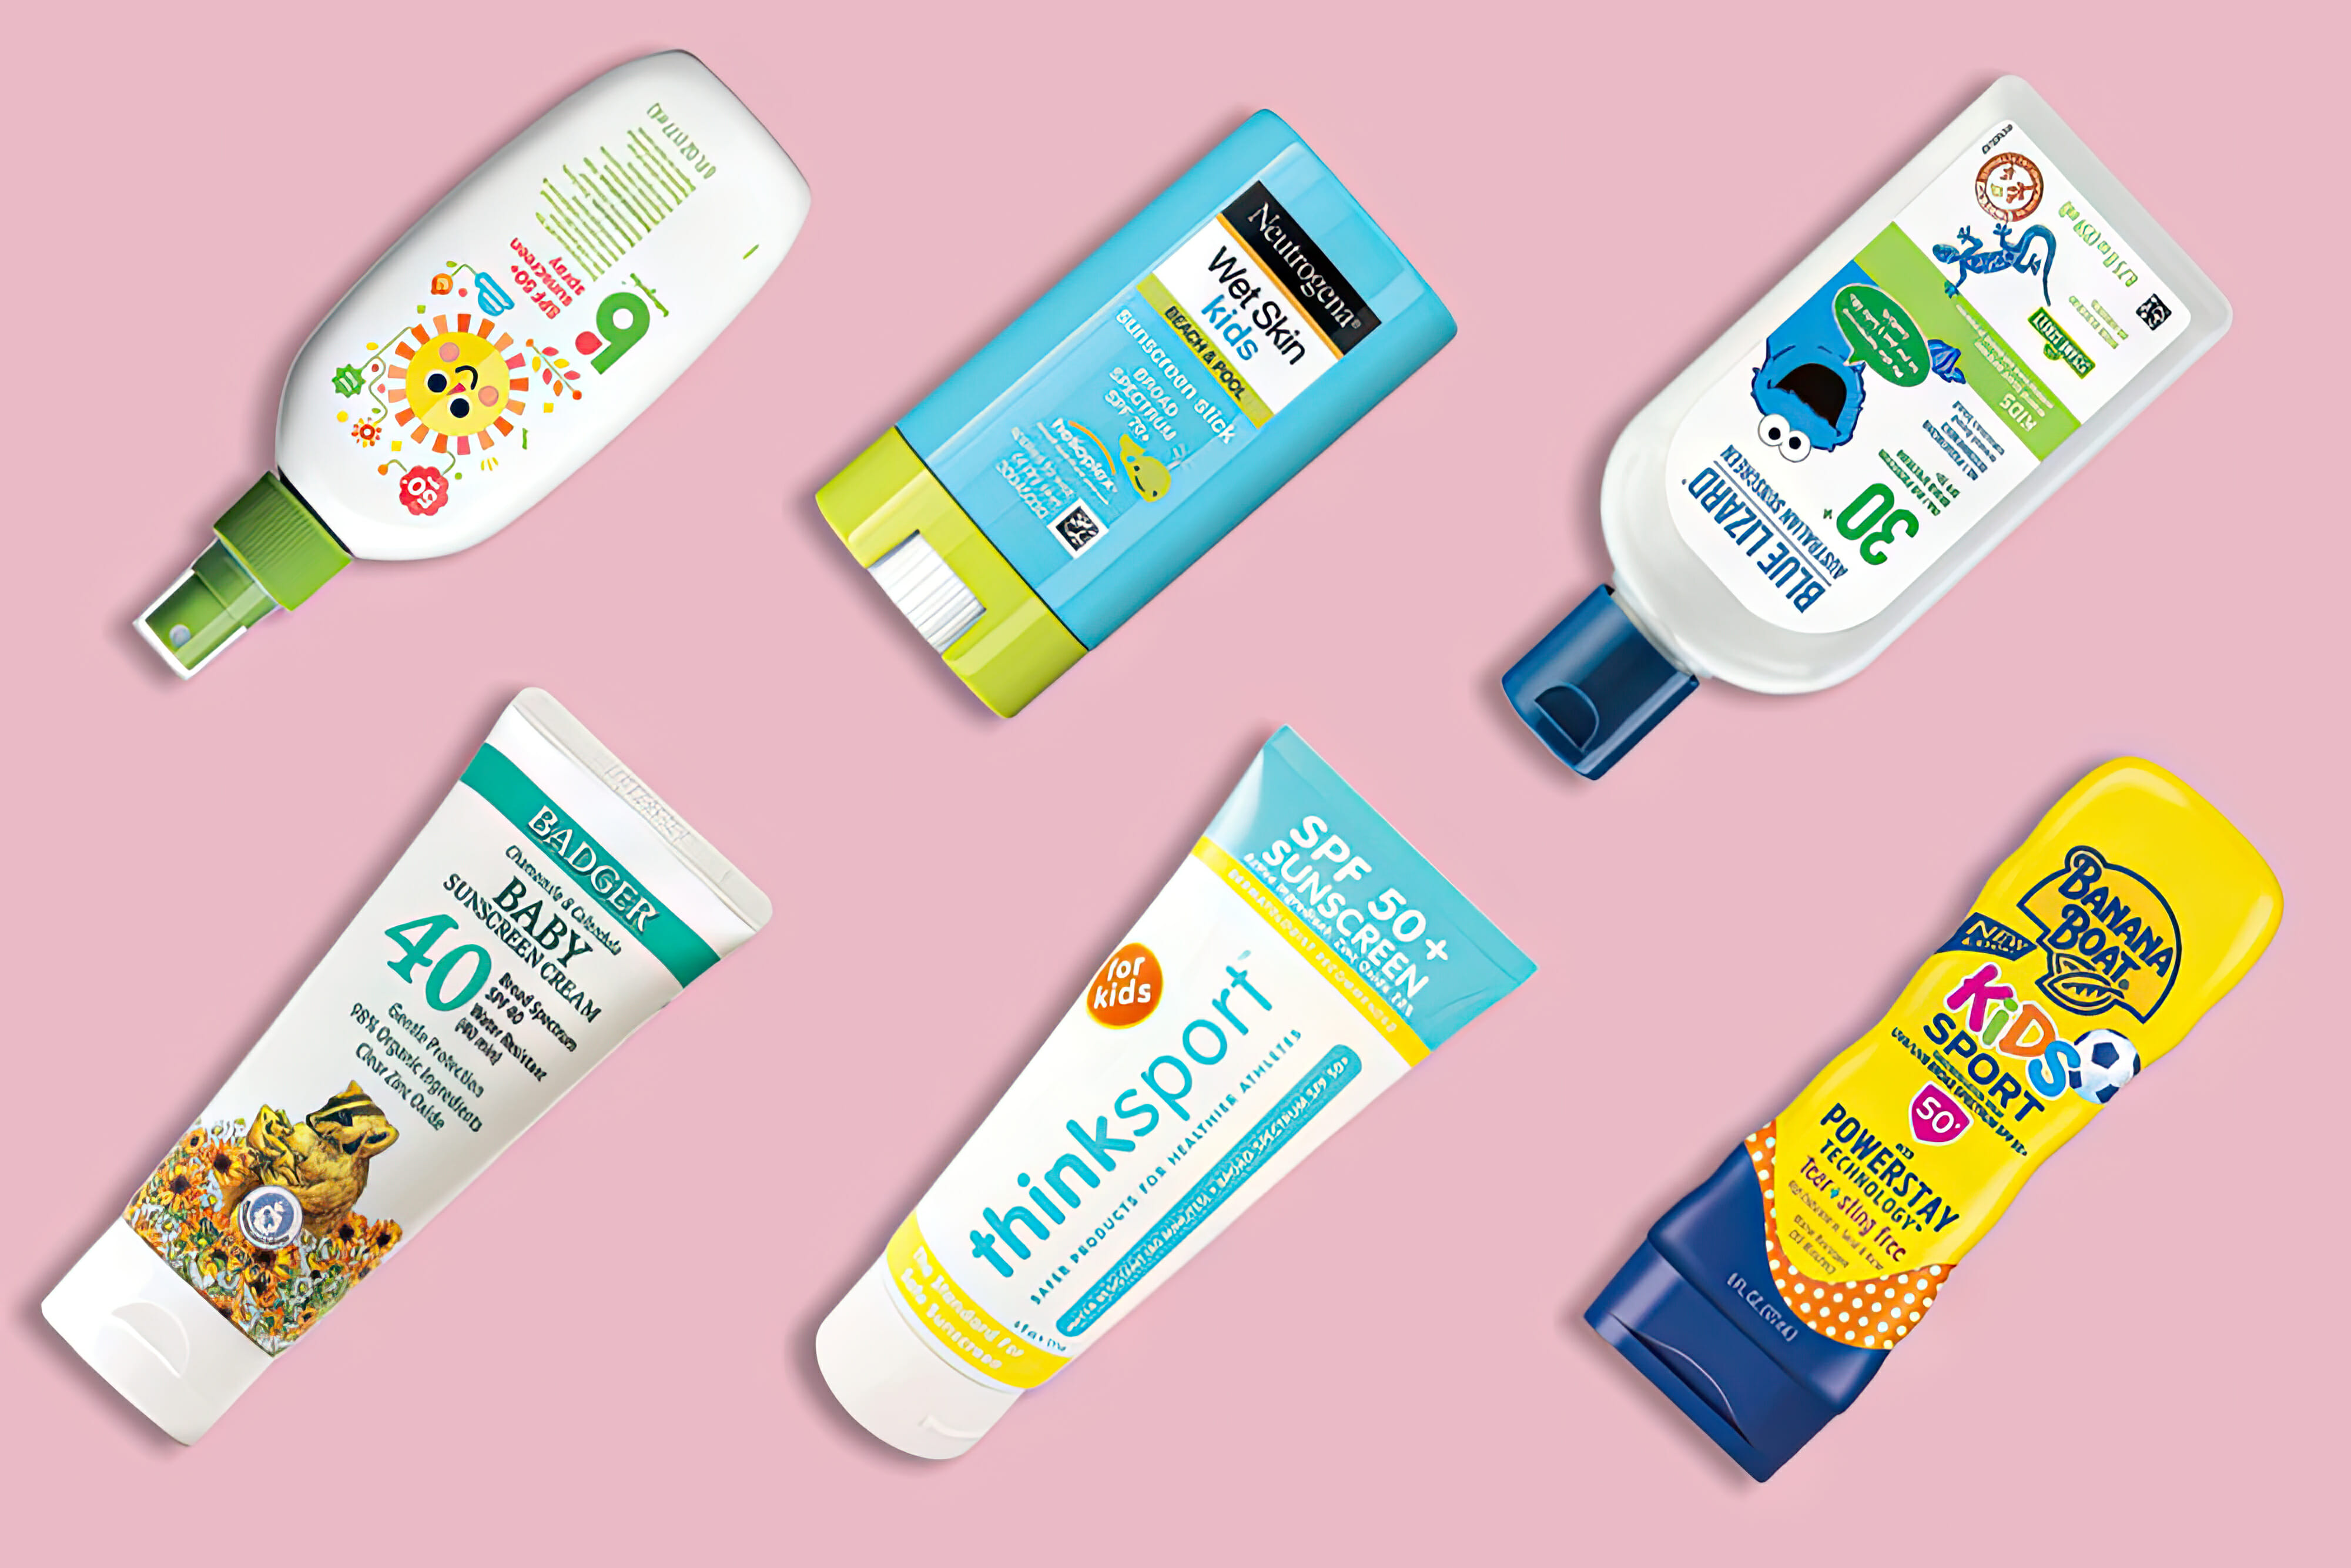 Various sunscreens for kids